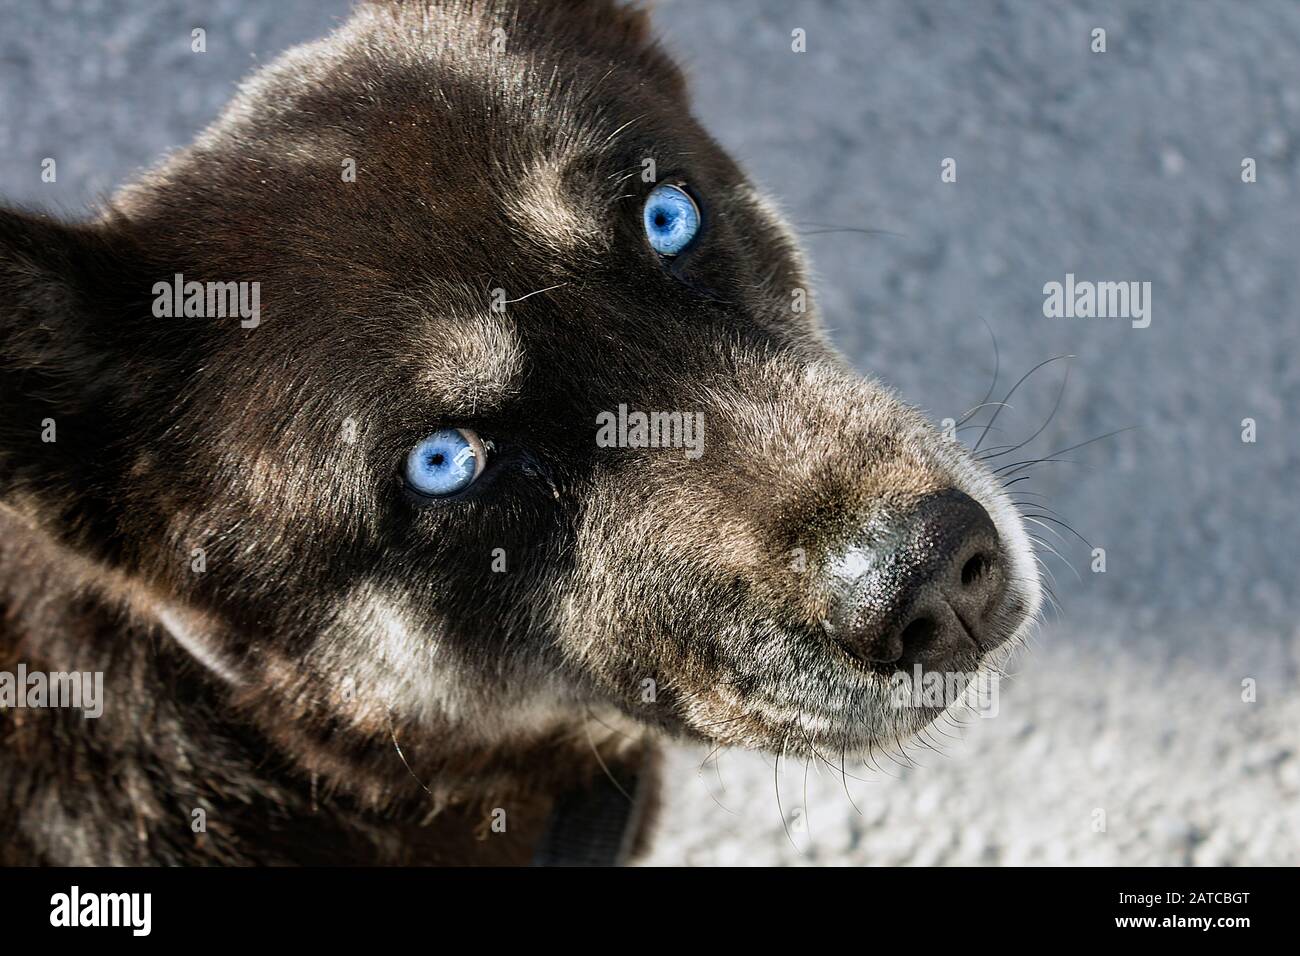 Close up portrait of the head of a stray dog, mulatto, inherited Husky eyes of ice blue color, looking up at the camera in high angle view image. Stock Photo